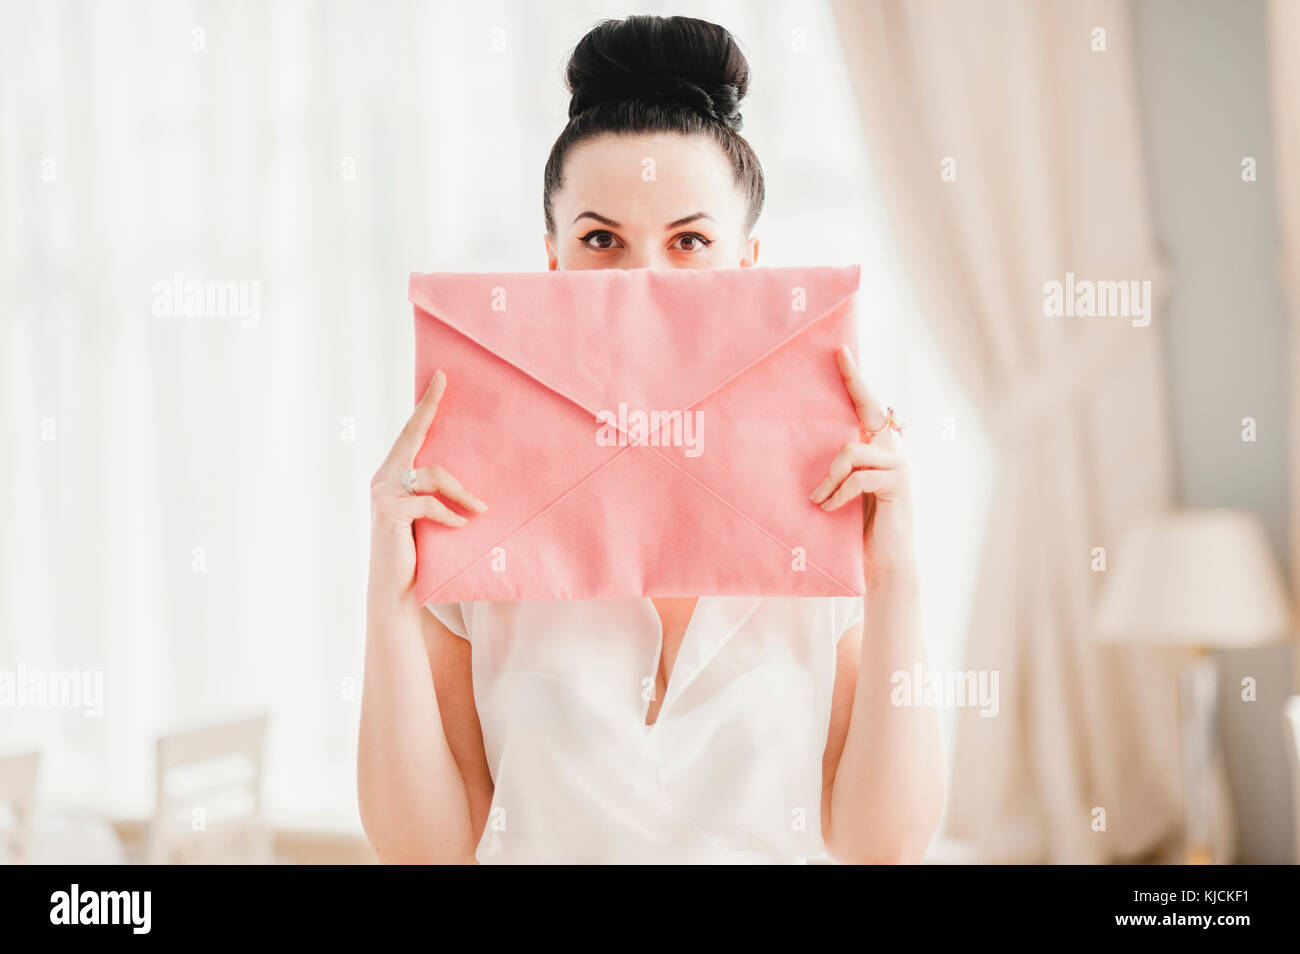 Glamorous Middle Eastern woman covering face with pink purse Stock Photo